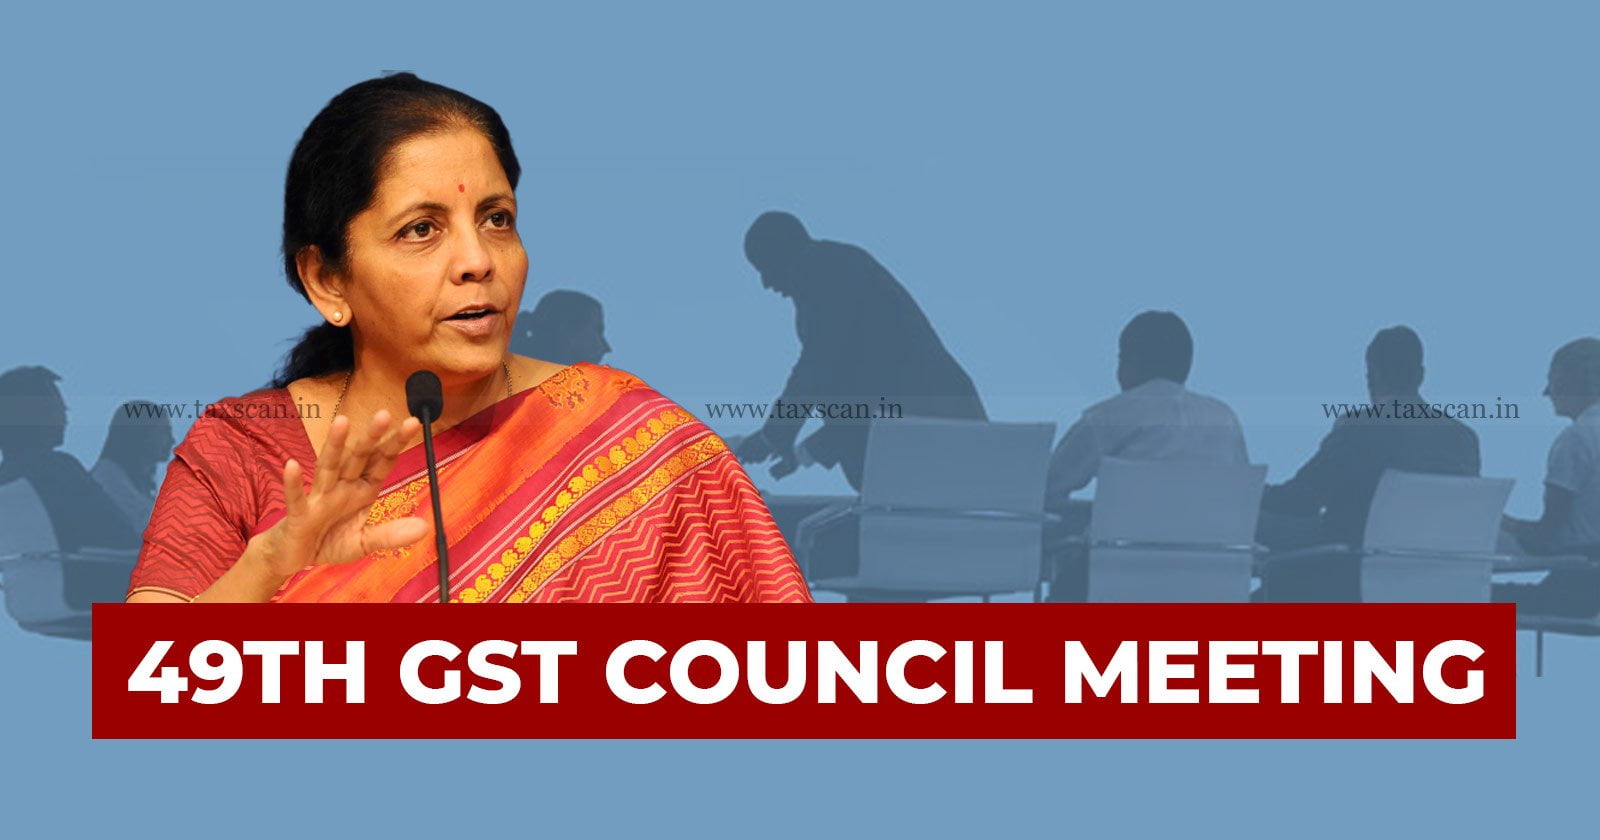 49th GST Council Meeting - GST Council Meeting - GST - Stakeholders - Goods and Service Tax - 49th Goods and Service Tax (GST) Council meeting - taxscan